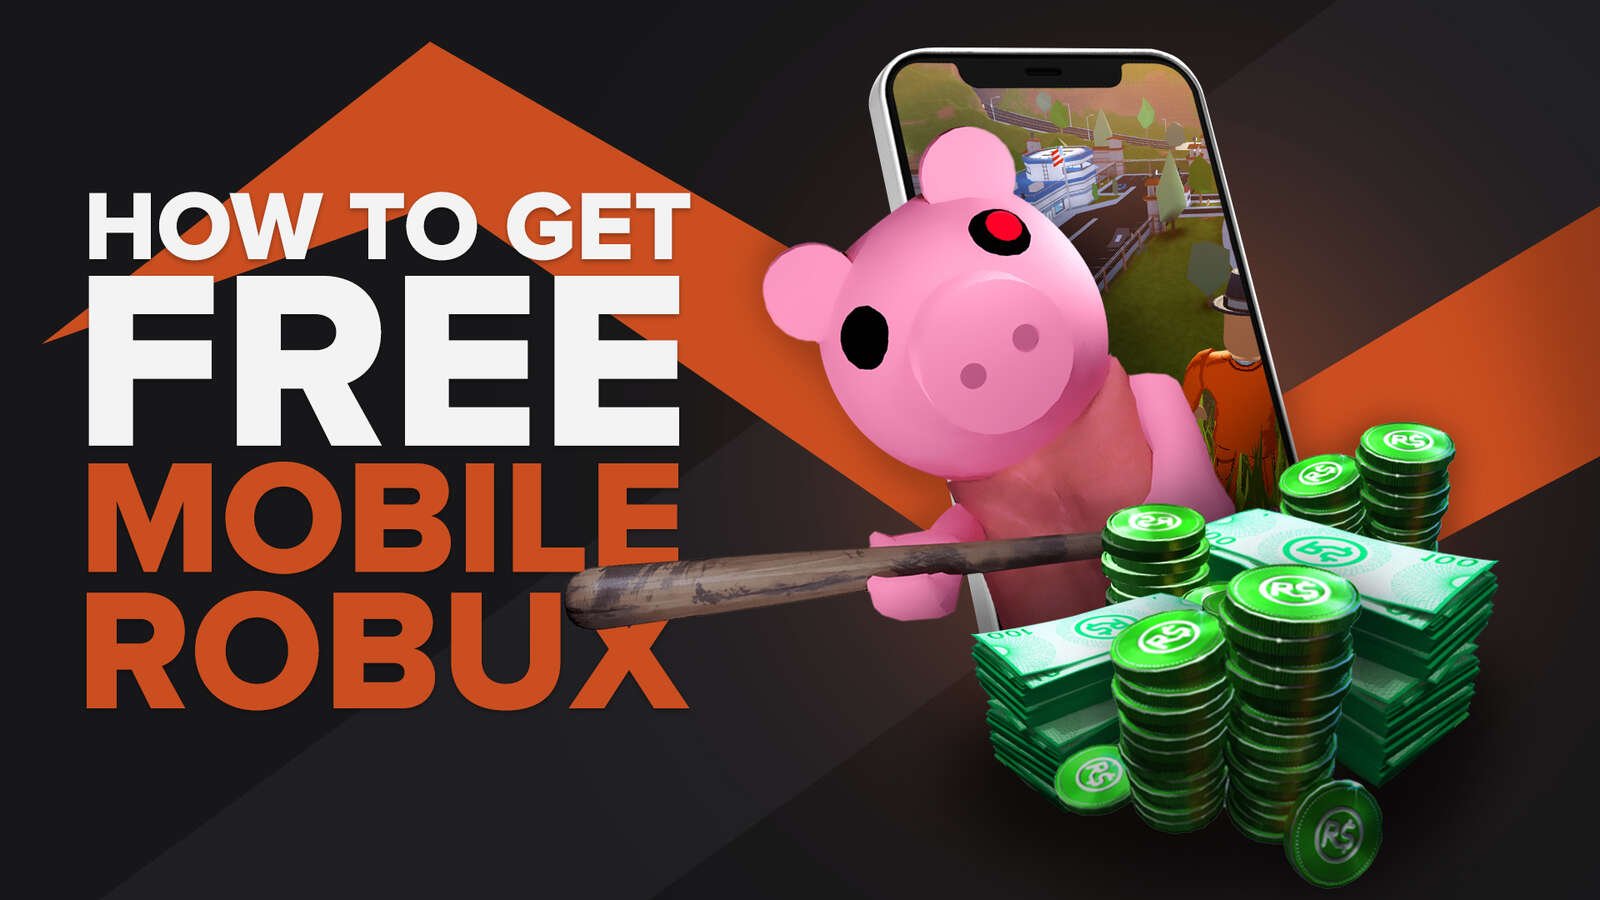 How To Get Free Robux On Mobile Roblox [2 Legit Ways]